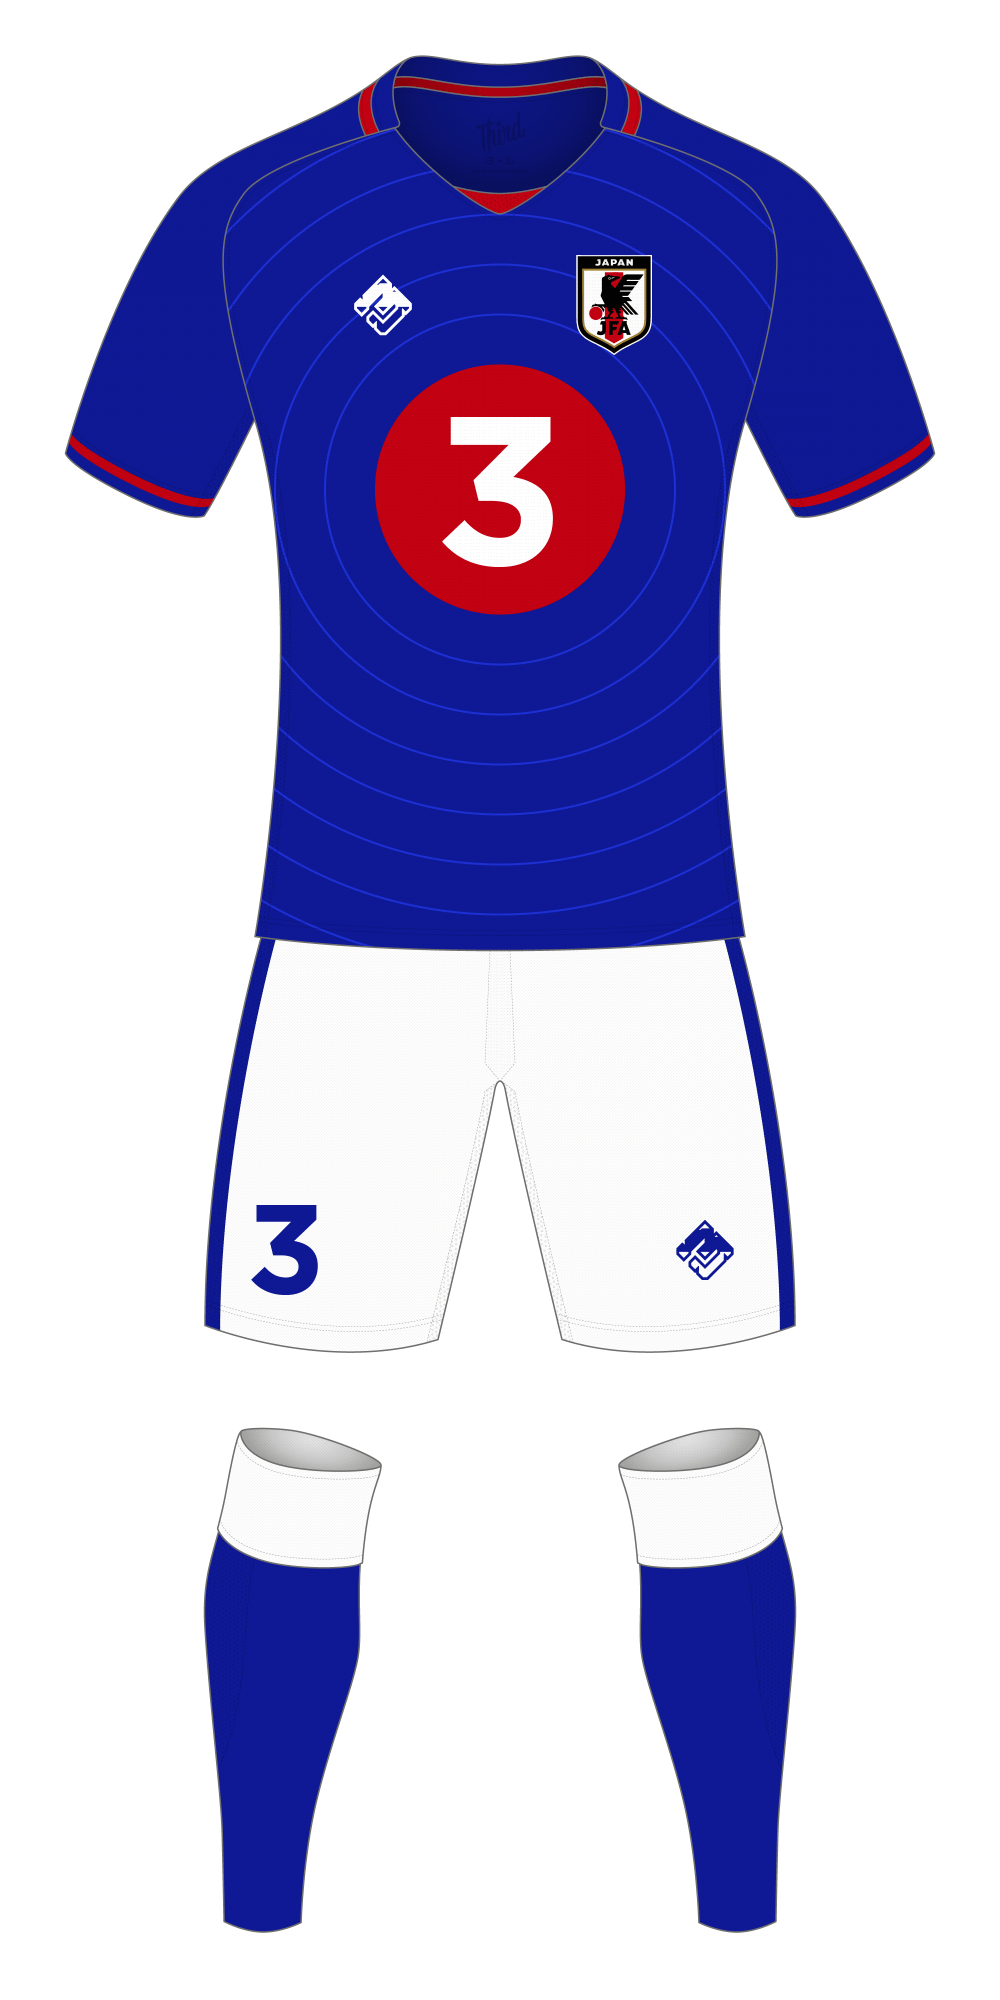 Japan World Cup 2018 concept